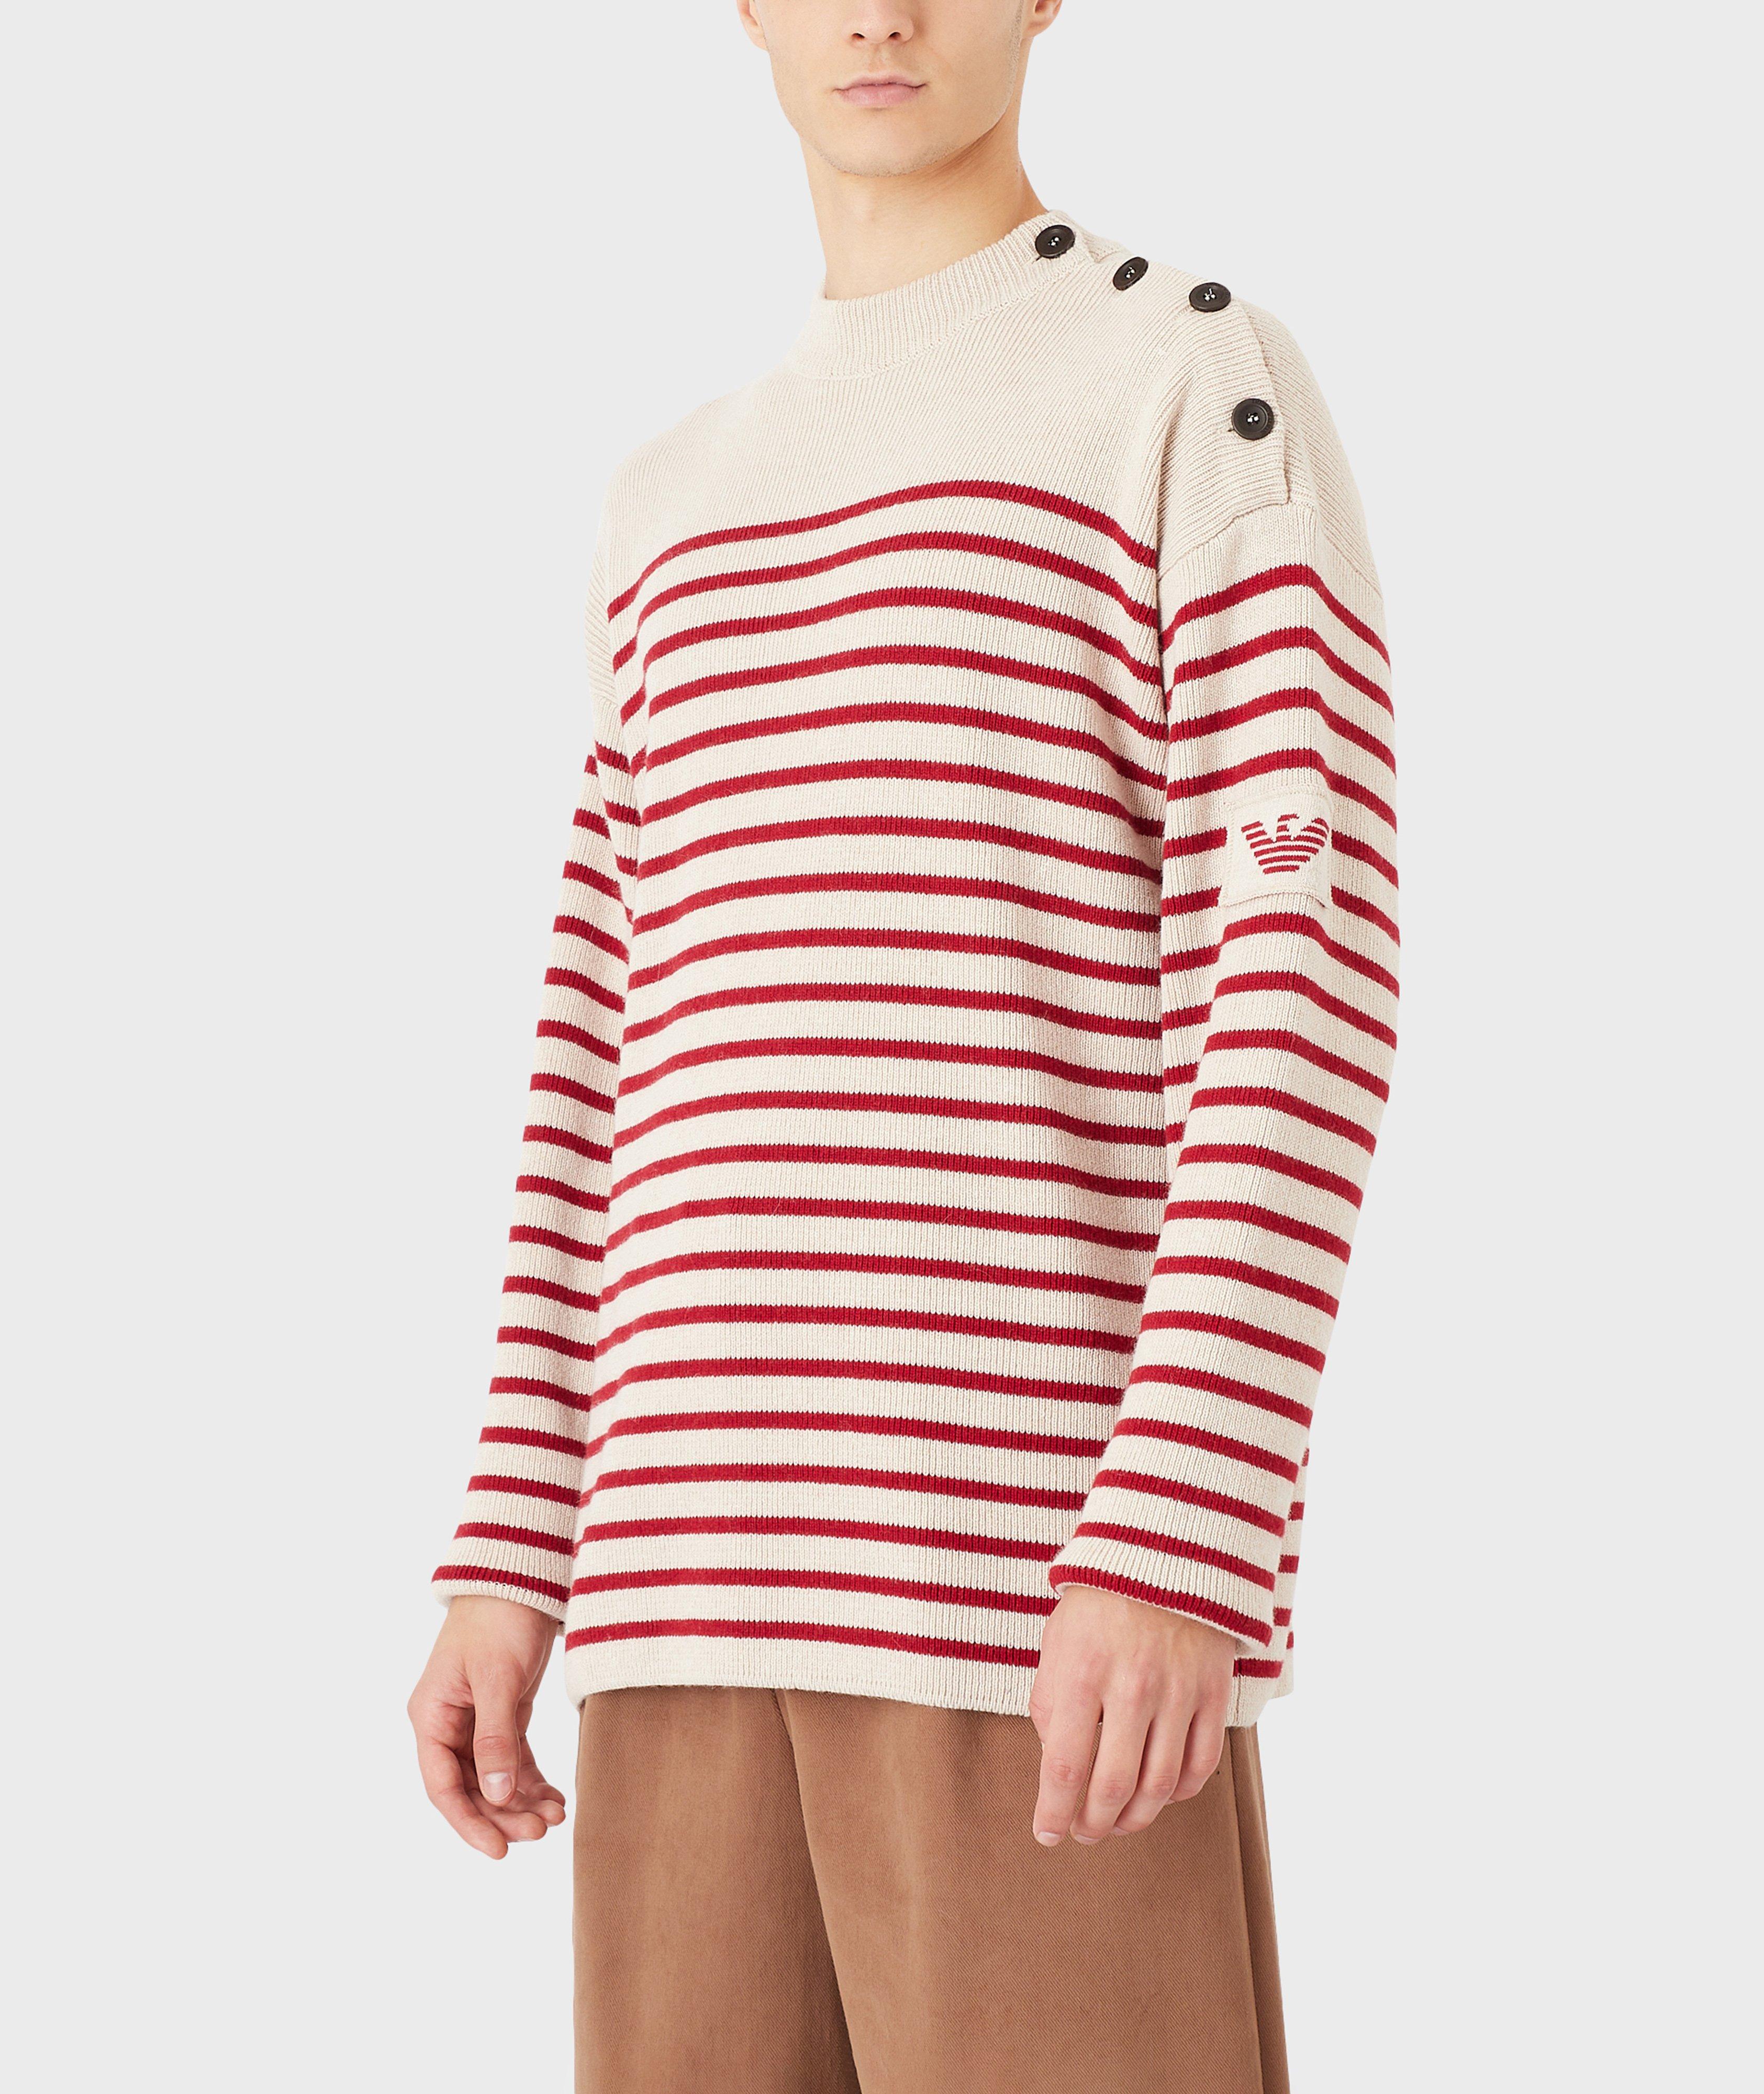 EArctic Sustainable Collection Wool-Blend Striped Jumper image 1